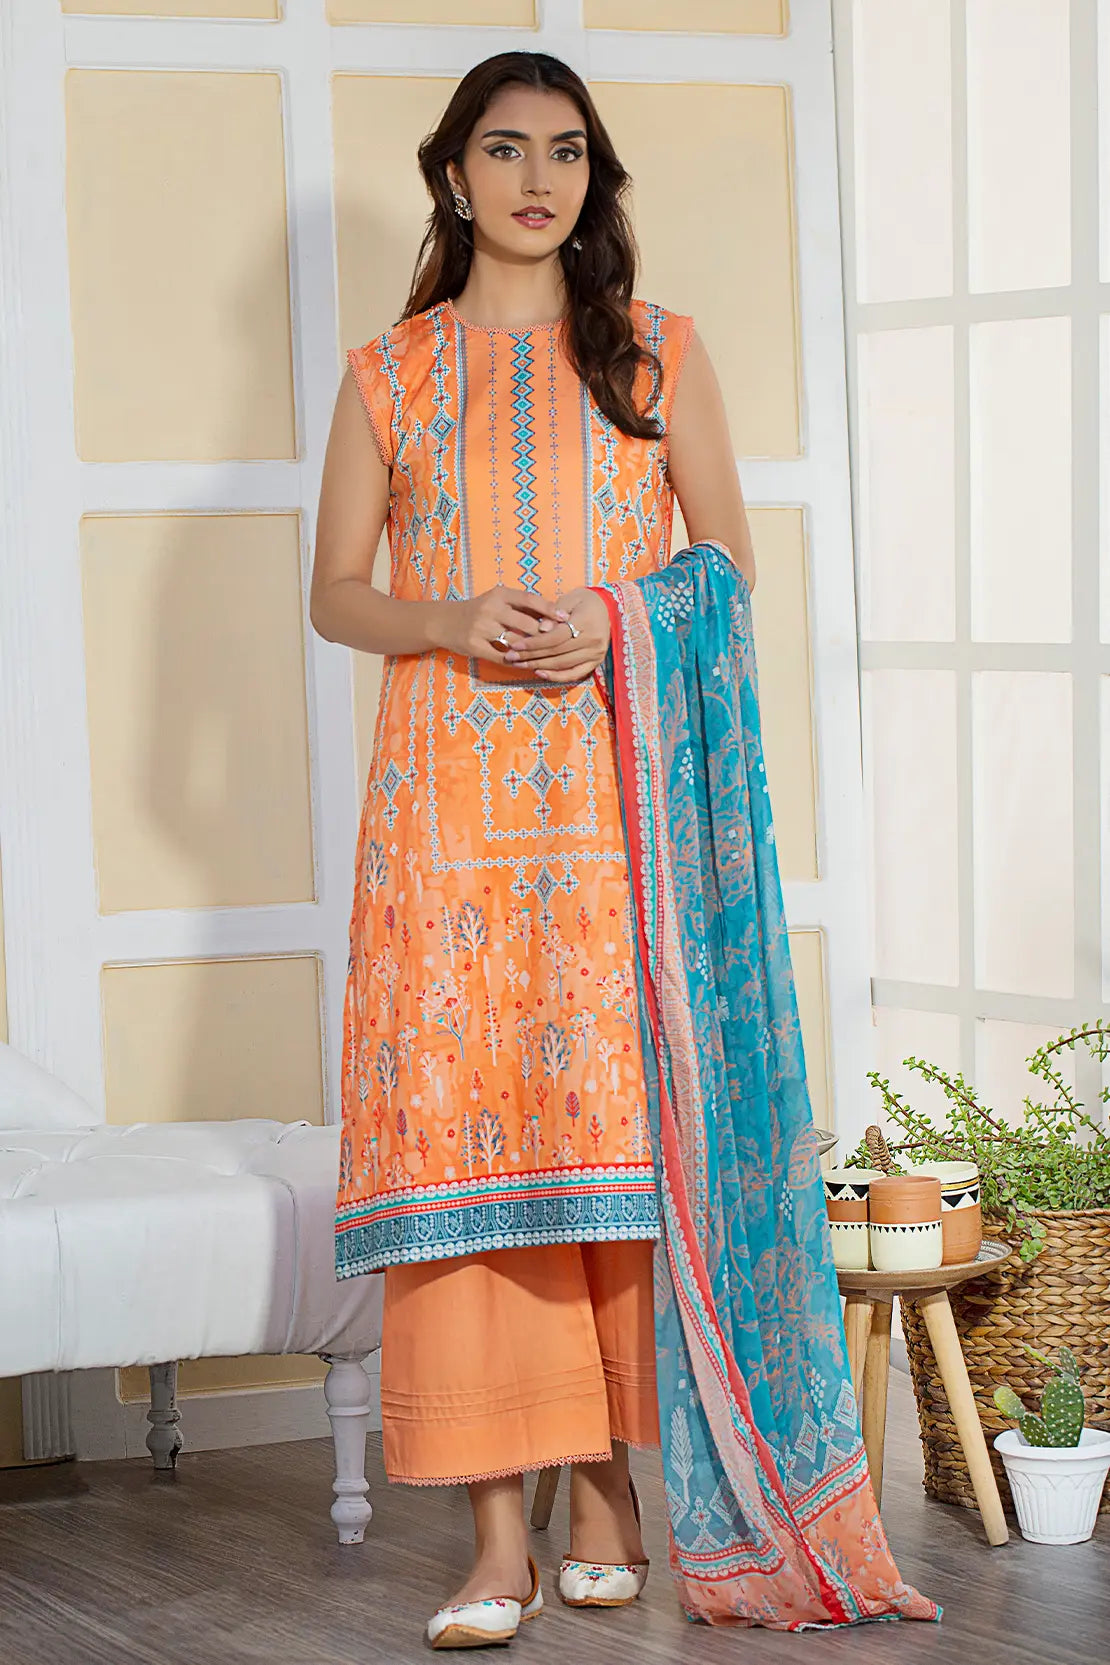 RASHID TEXTILE MIRAL LUXURY PRINTED CAMBRIC 3PC SUIT 8130